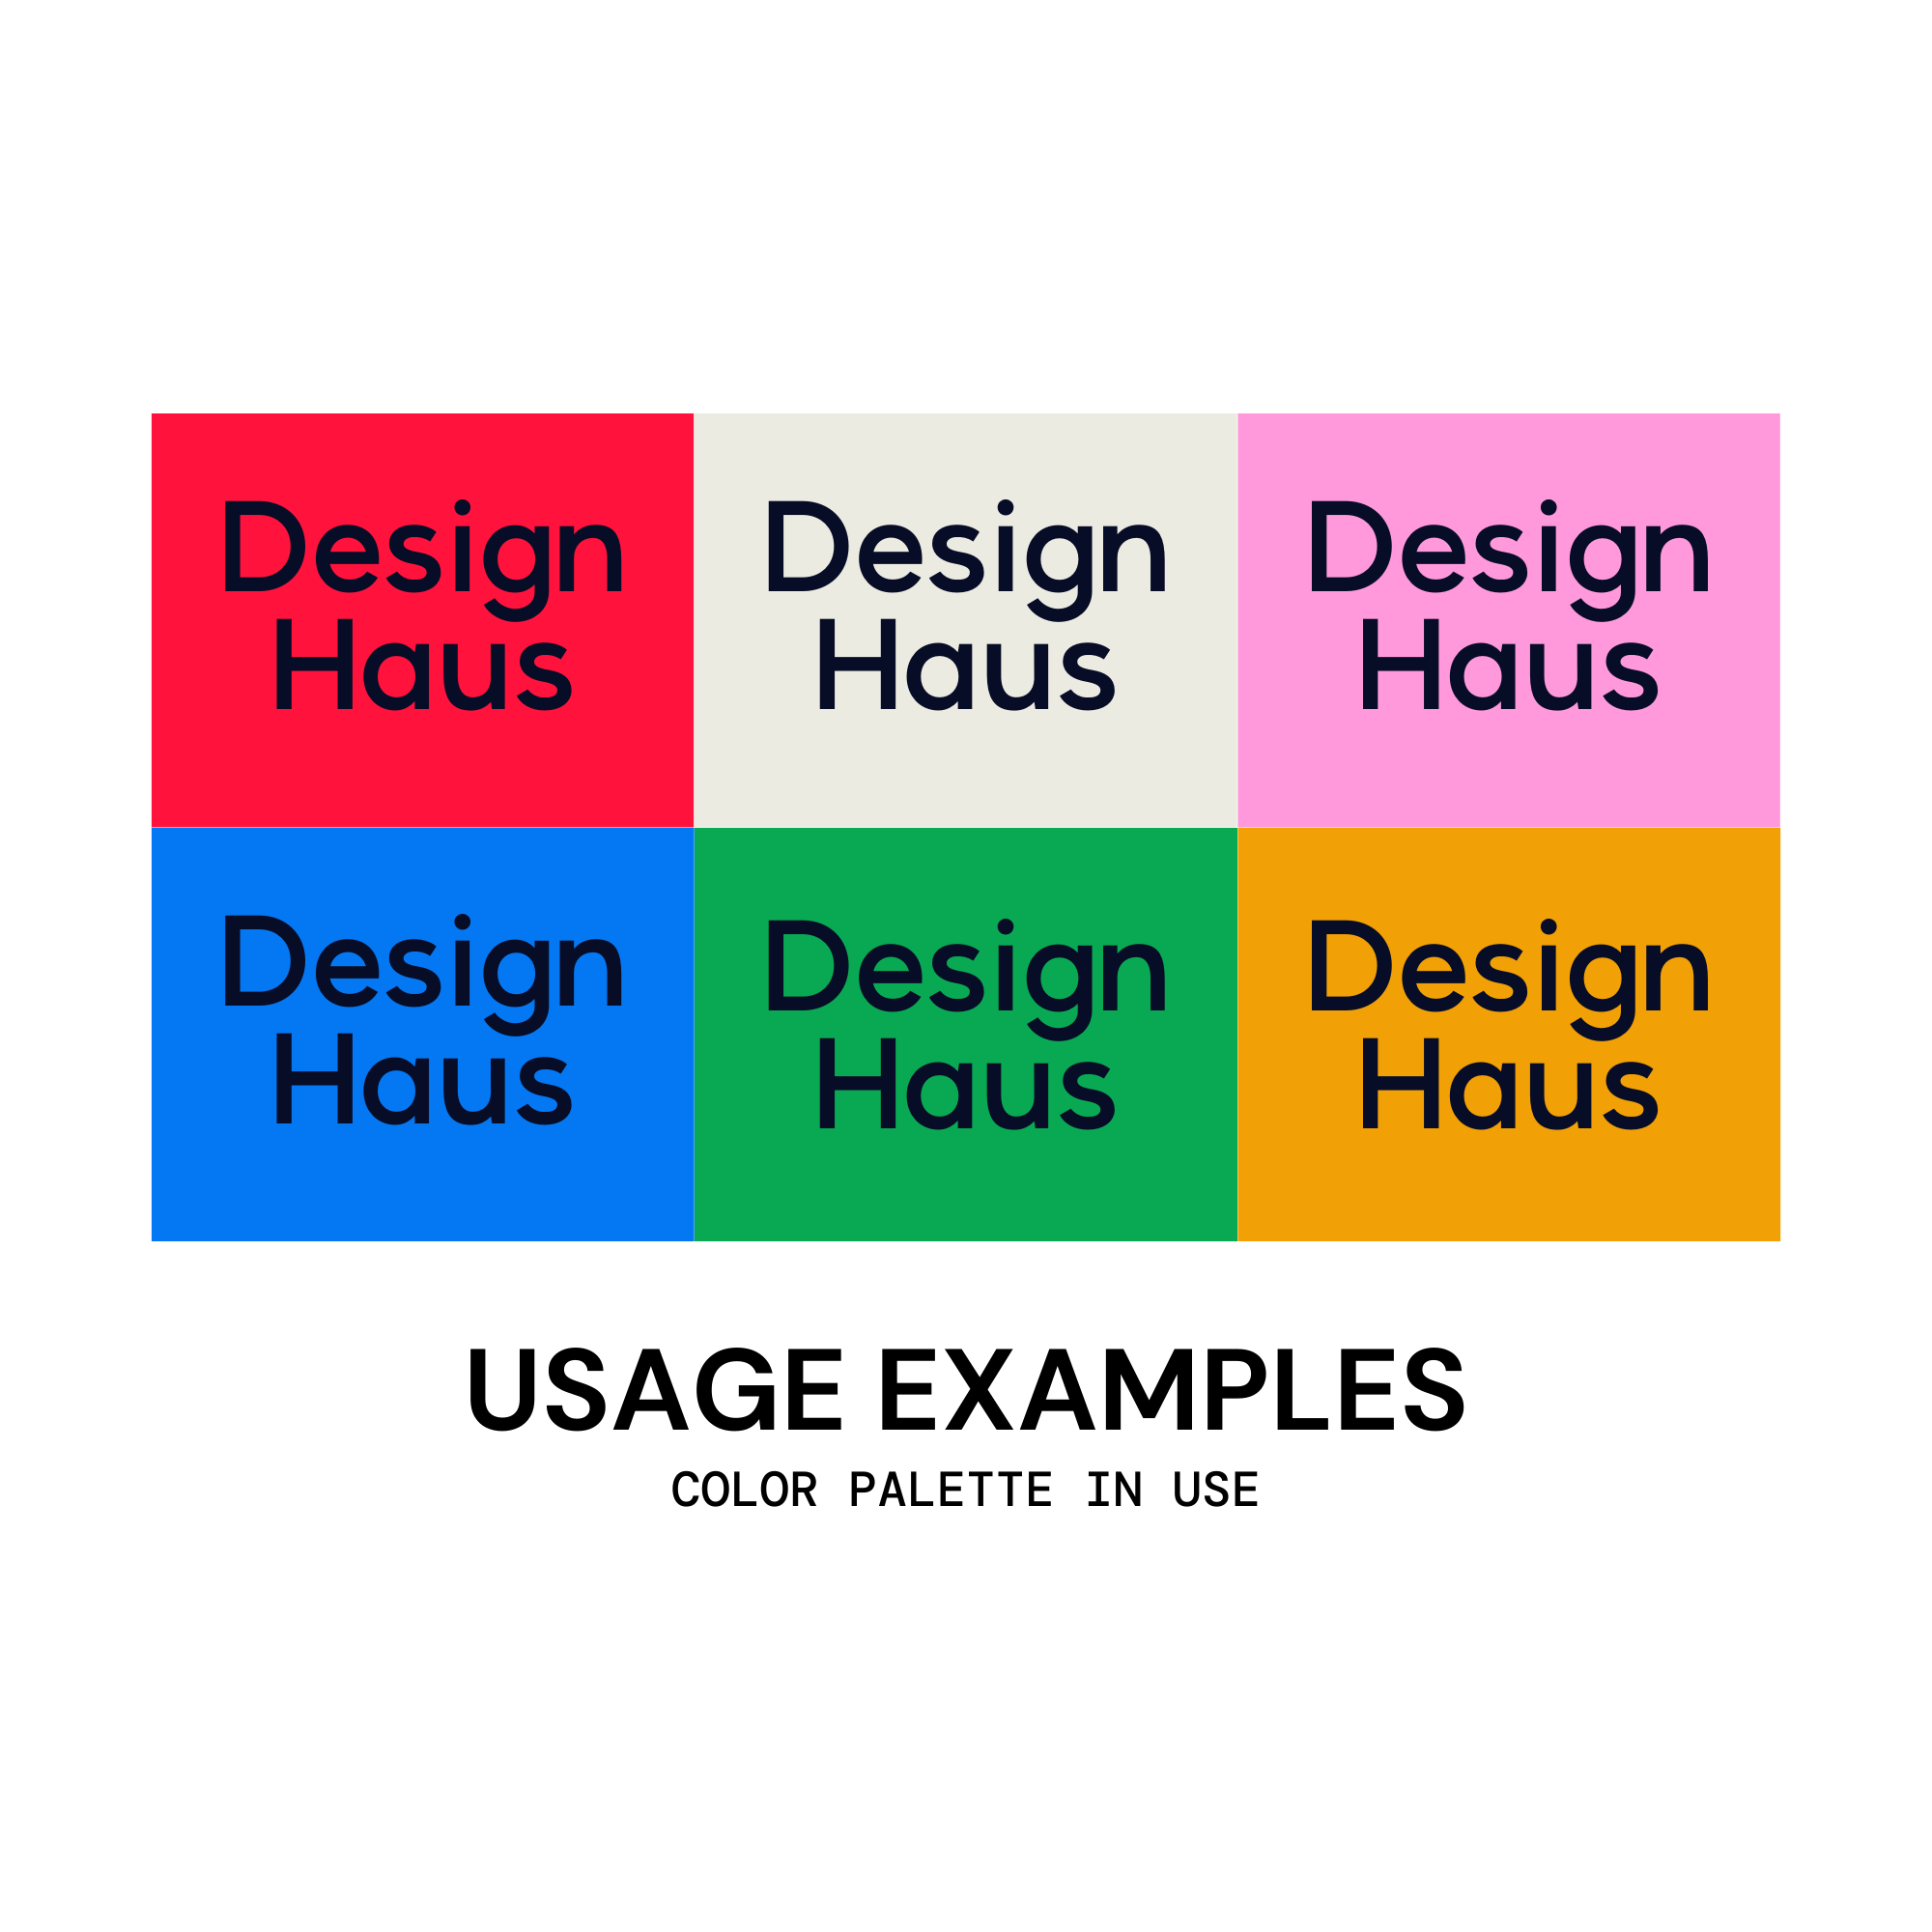 A preview of brand colors being paired with a brand logo ('Design Haus'). The logo is in a dark charcoal grey and this is a preview of how the logo looks on some bright and bold colorful backgrounds. 